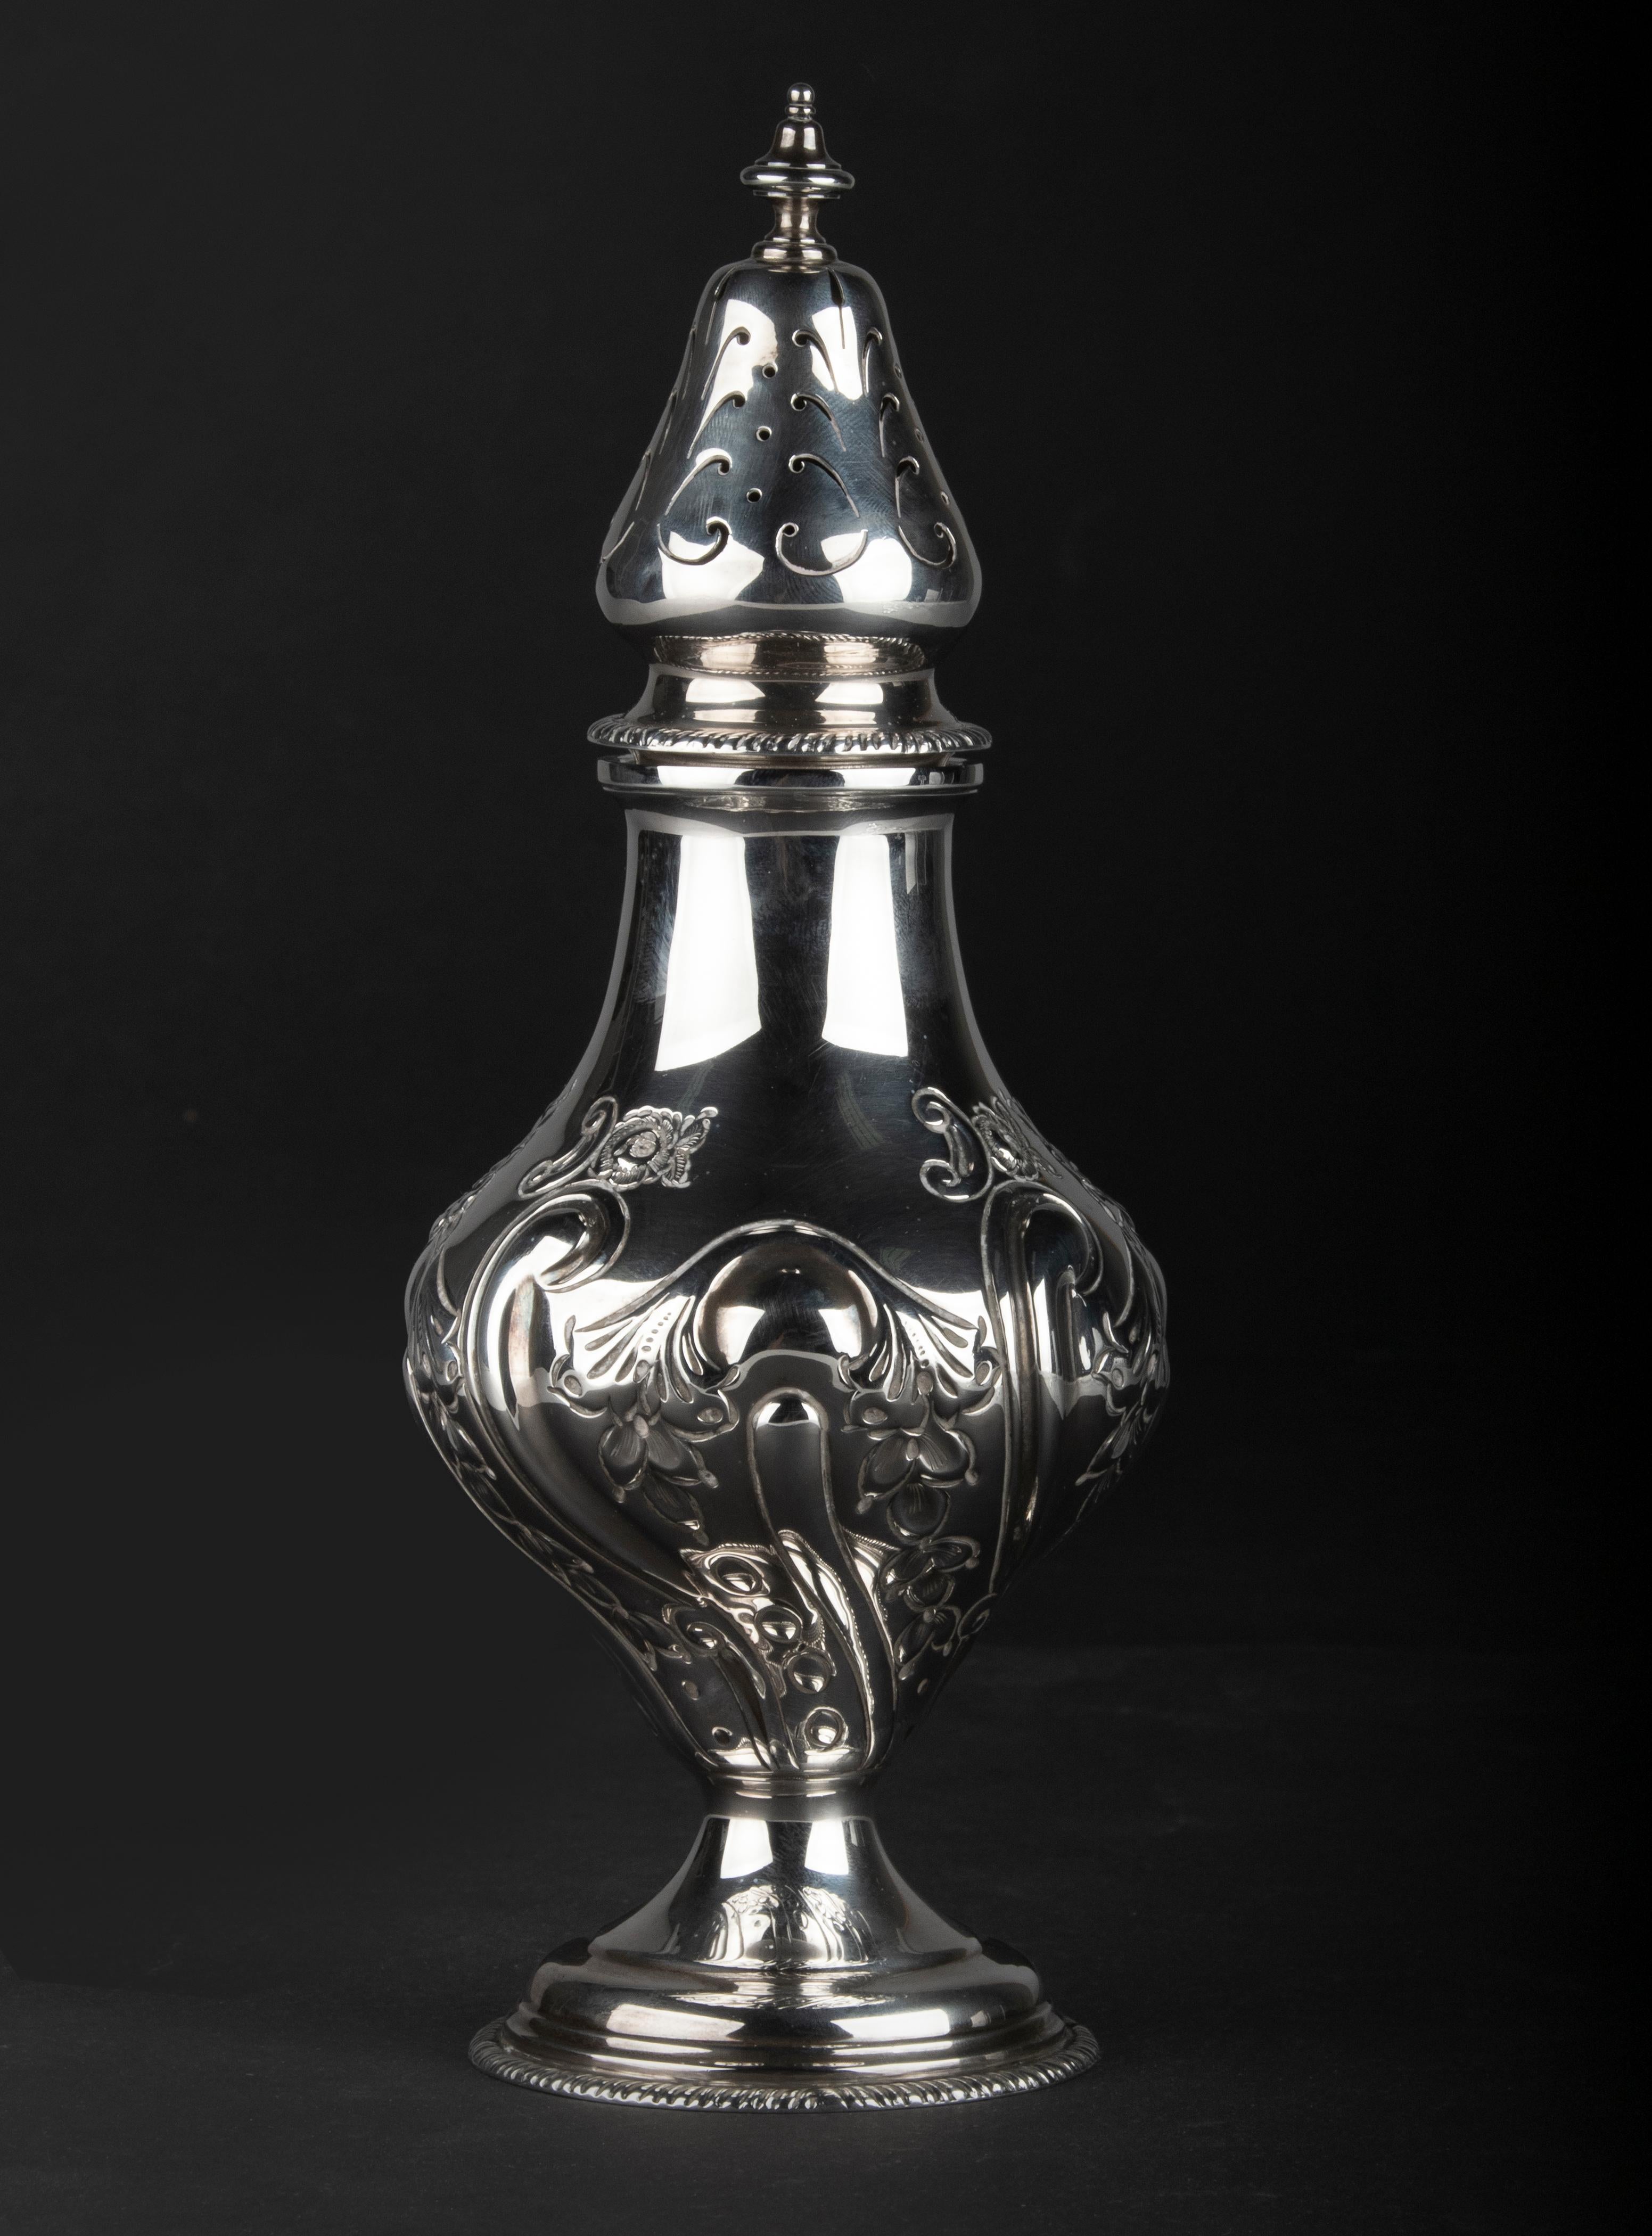 Large Sterling silver sugar caster, beautiful model with beautiful decorations in Regency style. The spreader has hallmarks of the city of Chester, dated 1905. The maker's mark is also known, this one is Cornelius Desormeaux Saunders & James Francis